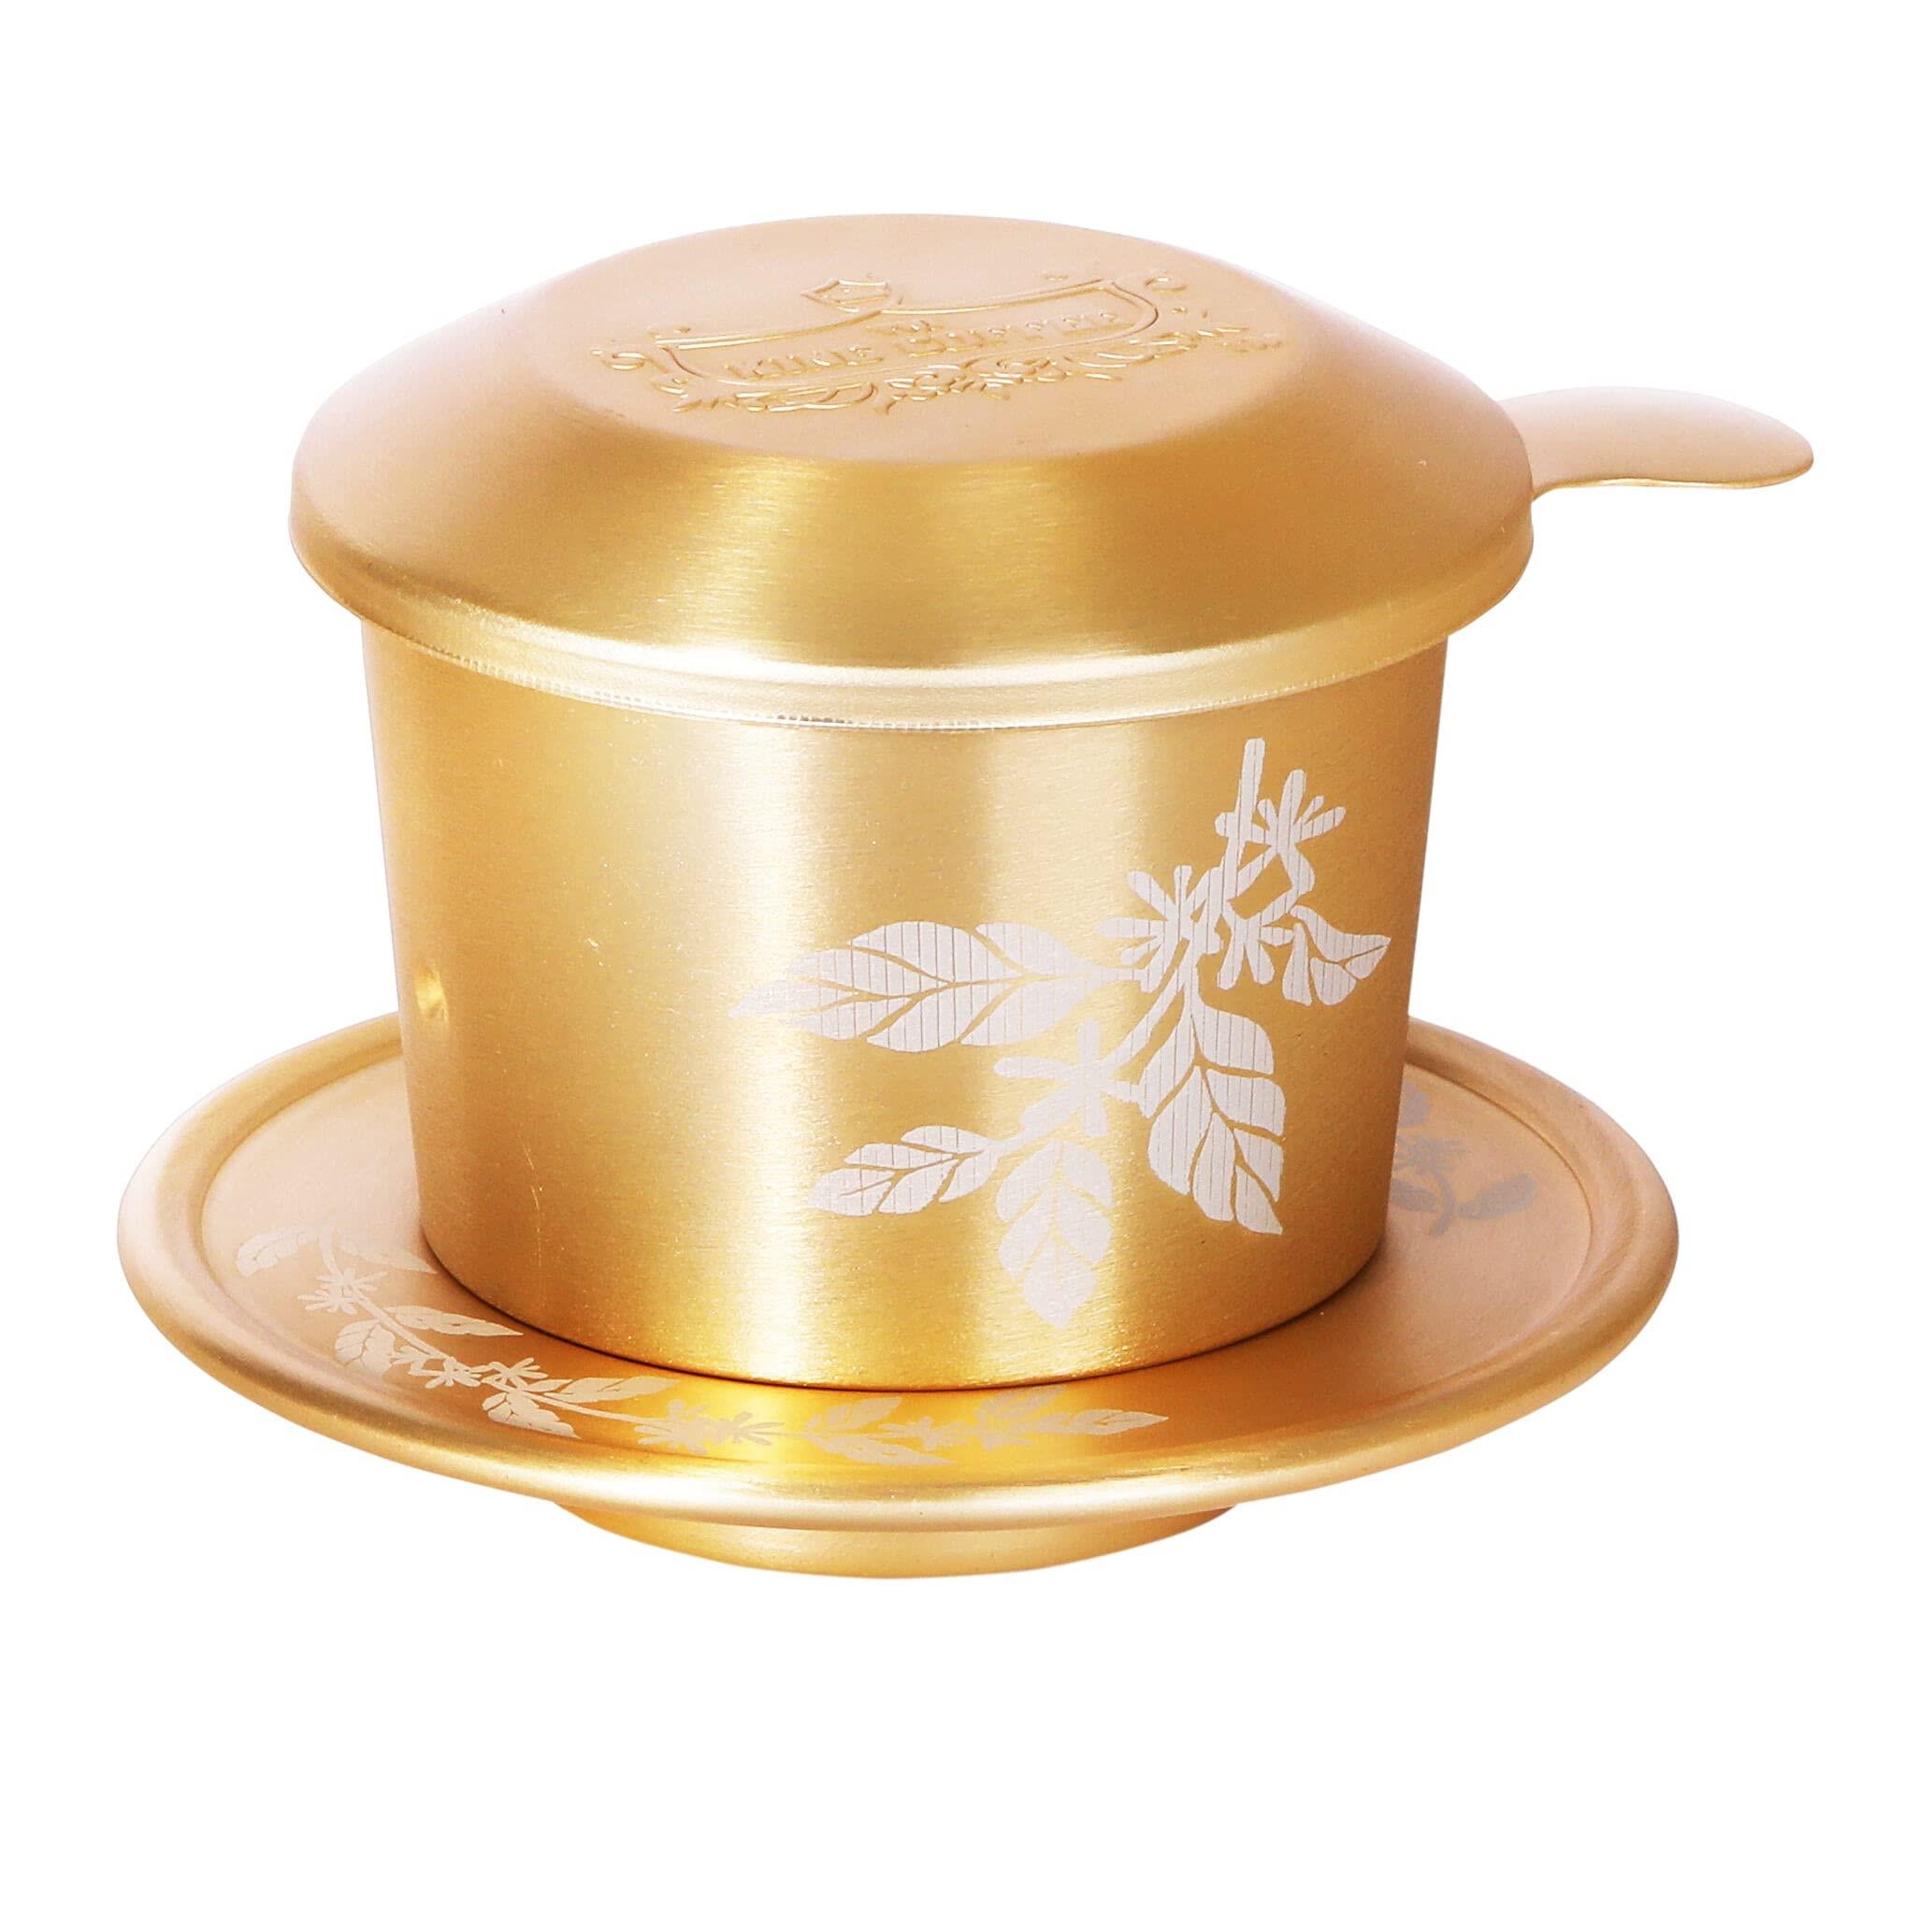 King Coffee GOLD PHIN FILTER for Vietnamese Coffee, Dripping Coffee Phin Filter Small Size 50 to 100ml